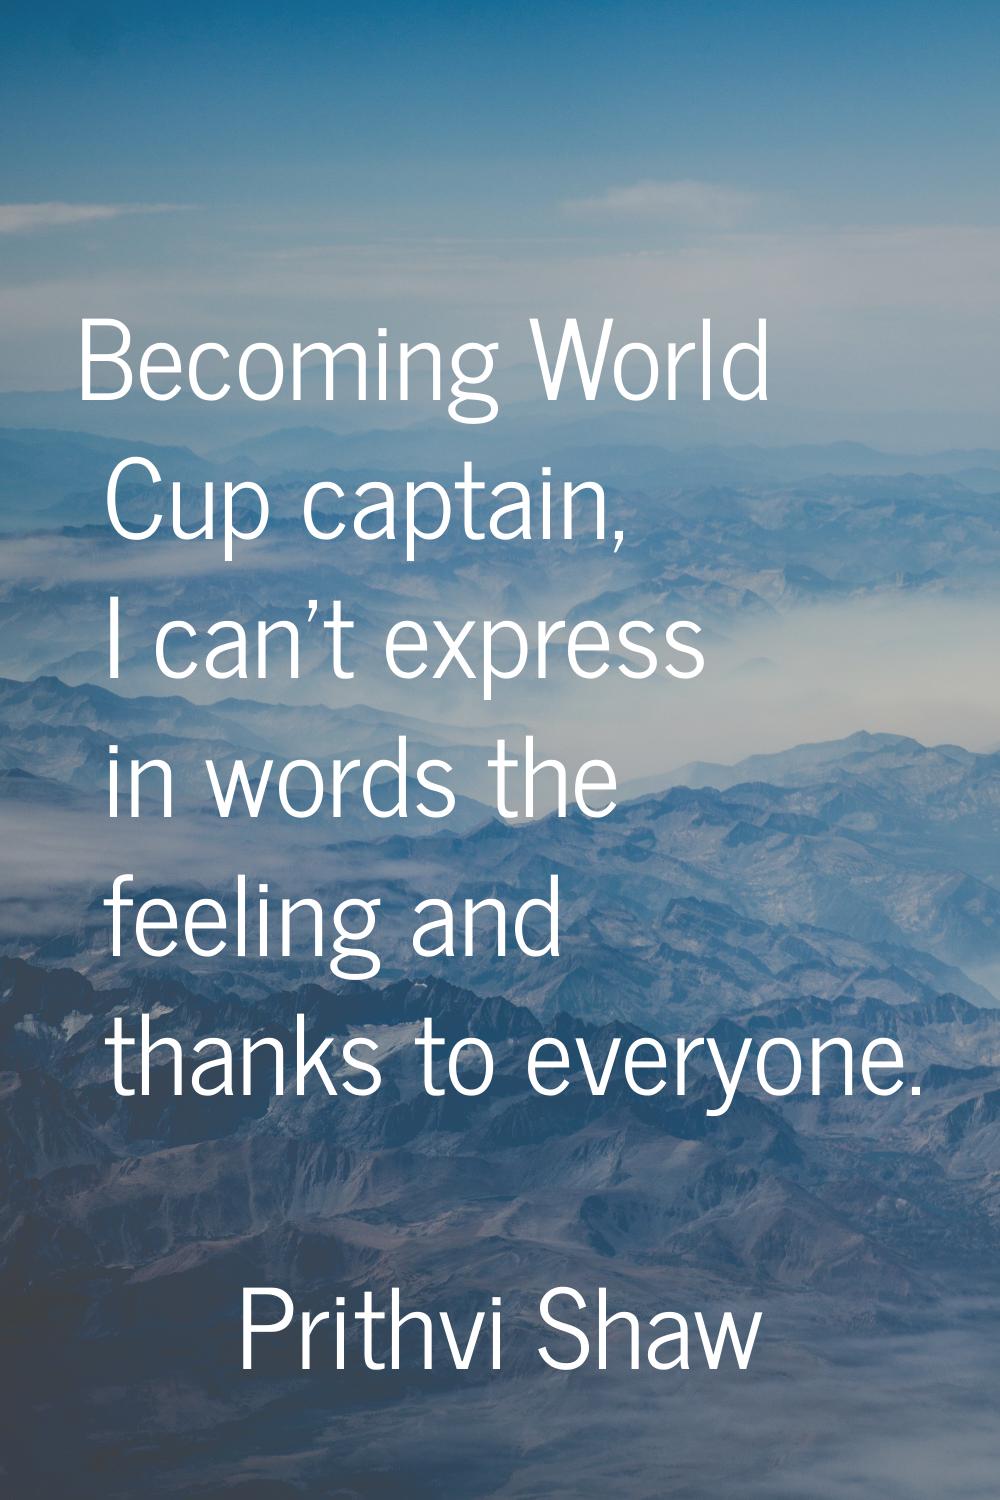 Becoming World Cup captain, I can't express in words the feeling and thanks to everyone.